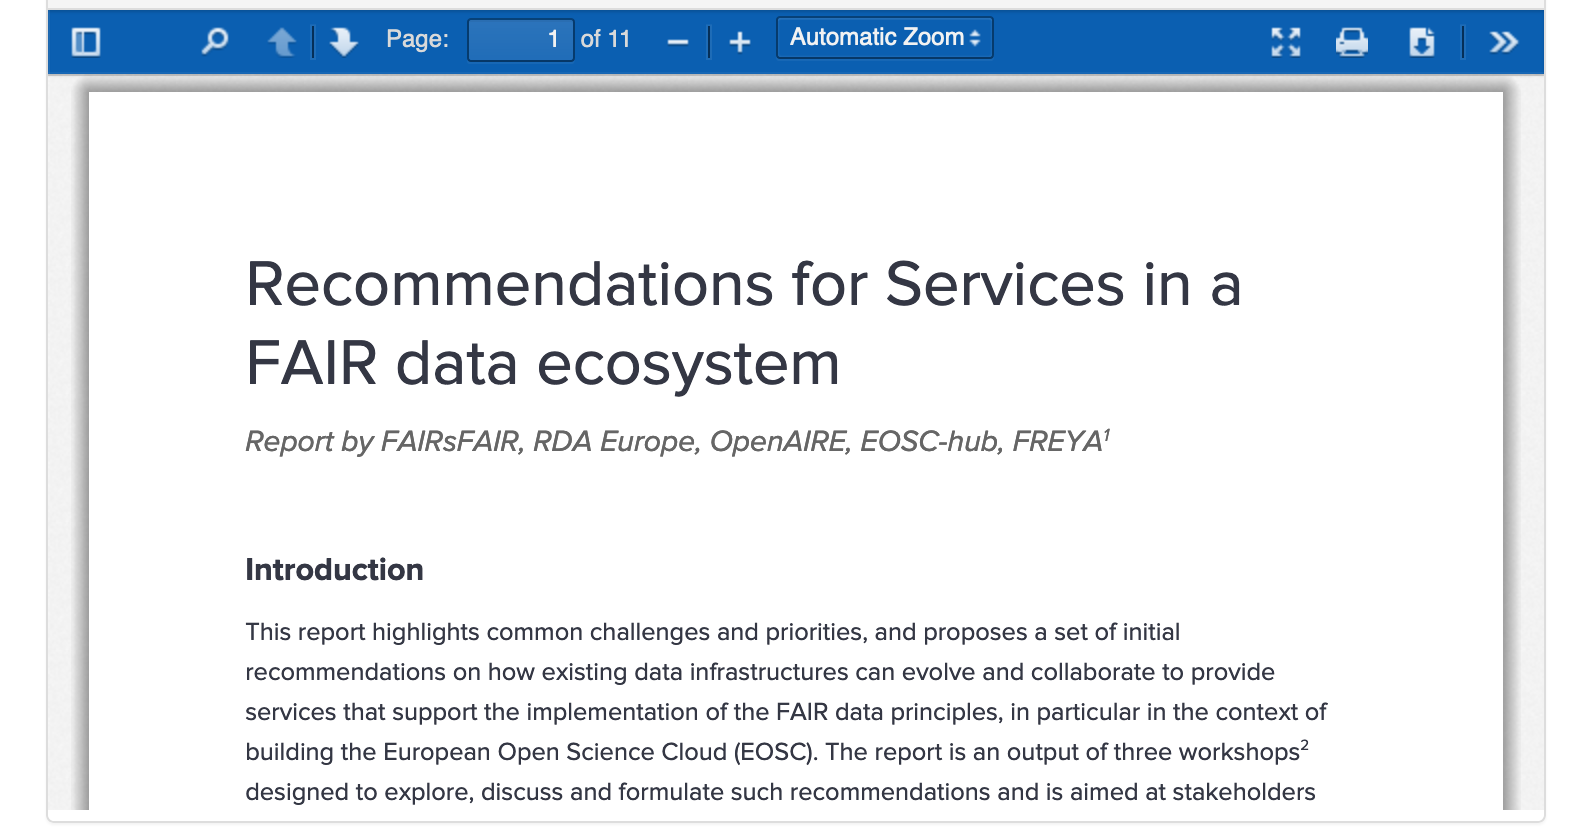 Recommendations for Services in a FAIR data ecosystem